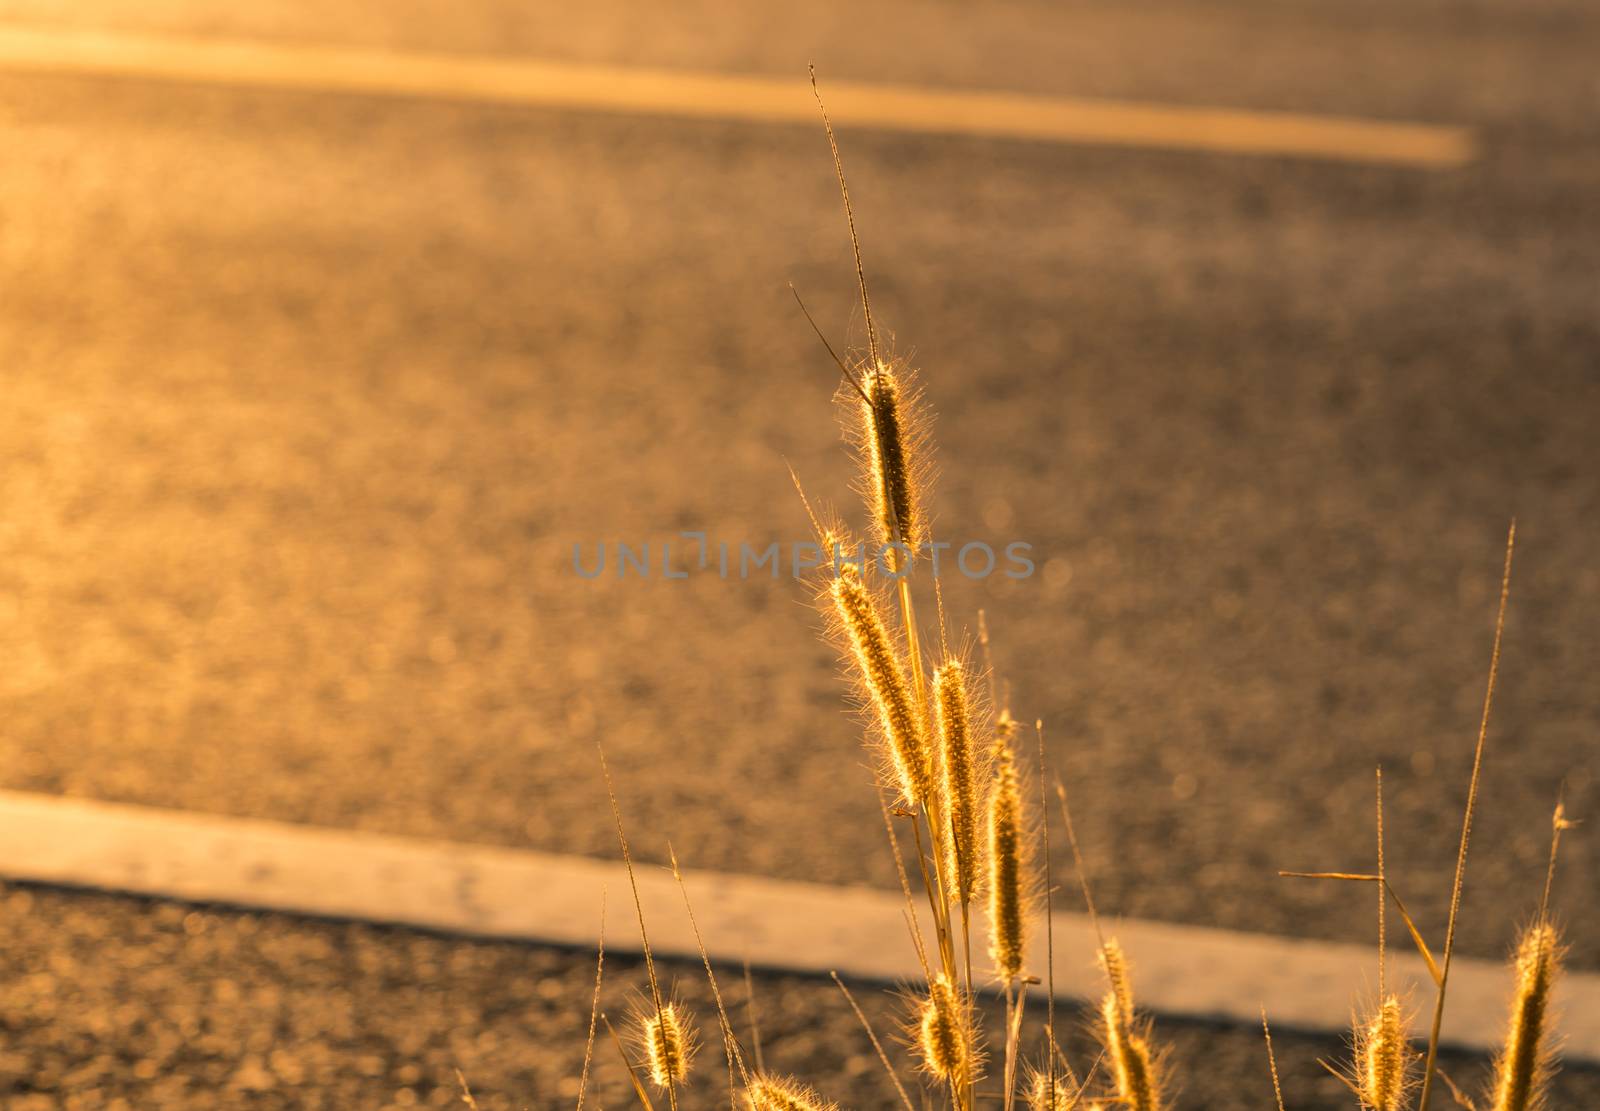 Flower of grass beside the way of asphalt road with white line traffic sign and morning warm light by Fahroni